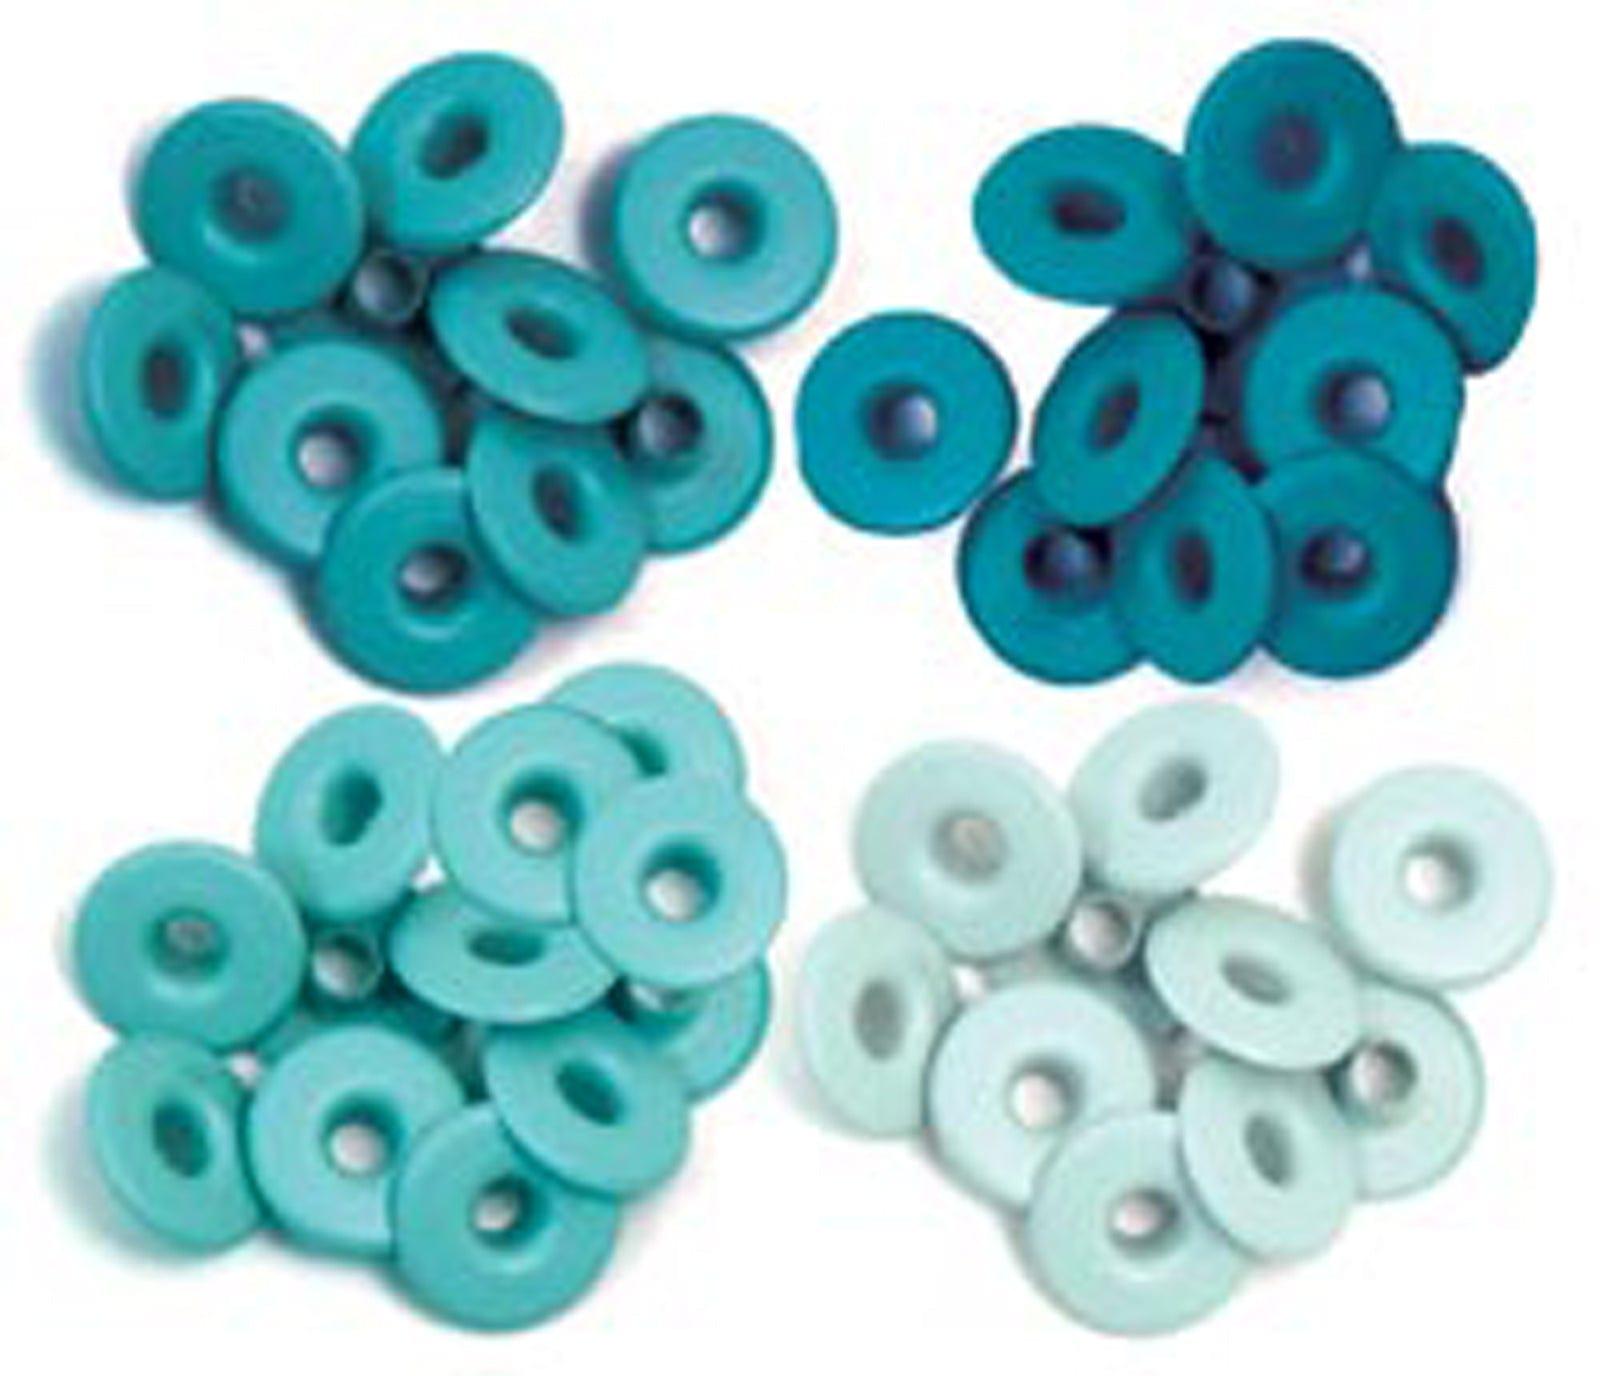 Wide Eyelets Collection Hues of Aqua .1875" Scrapbook Eyelets by We R Memory Keepers - 40 Pieces (10 of each color) - Scrapbook Supply Companies